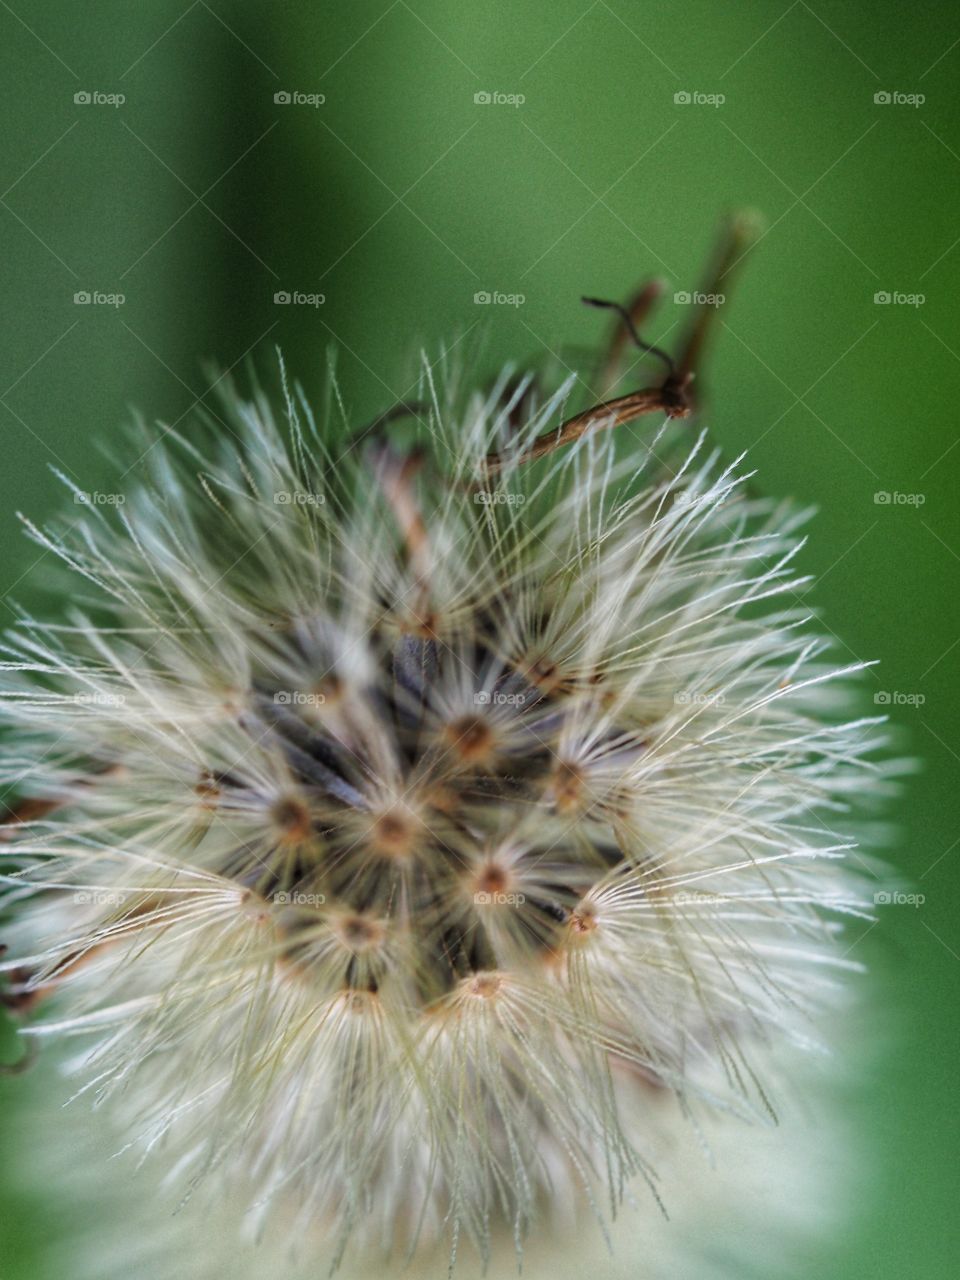 Close up images of grass flowers on a blurred background